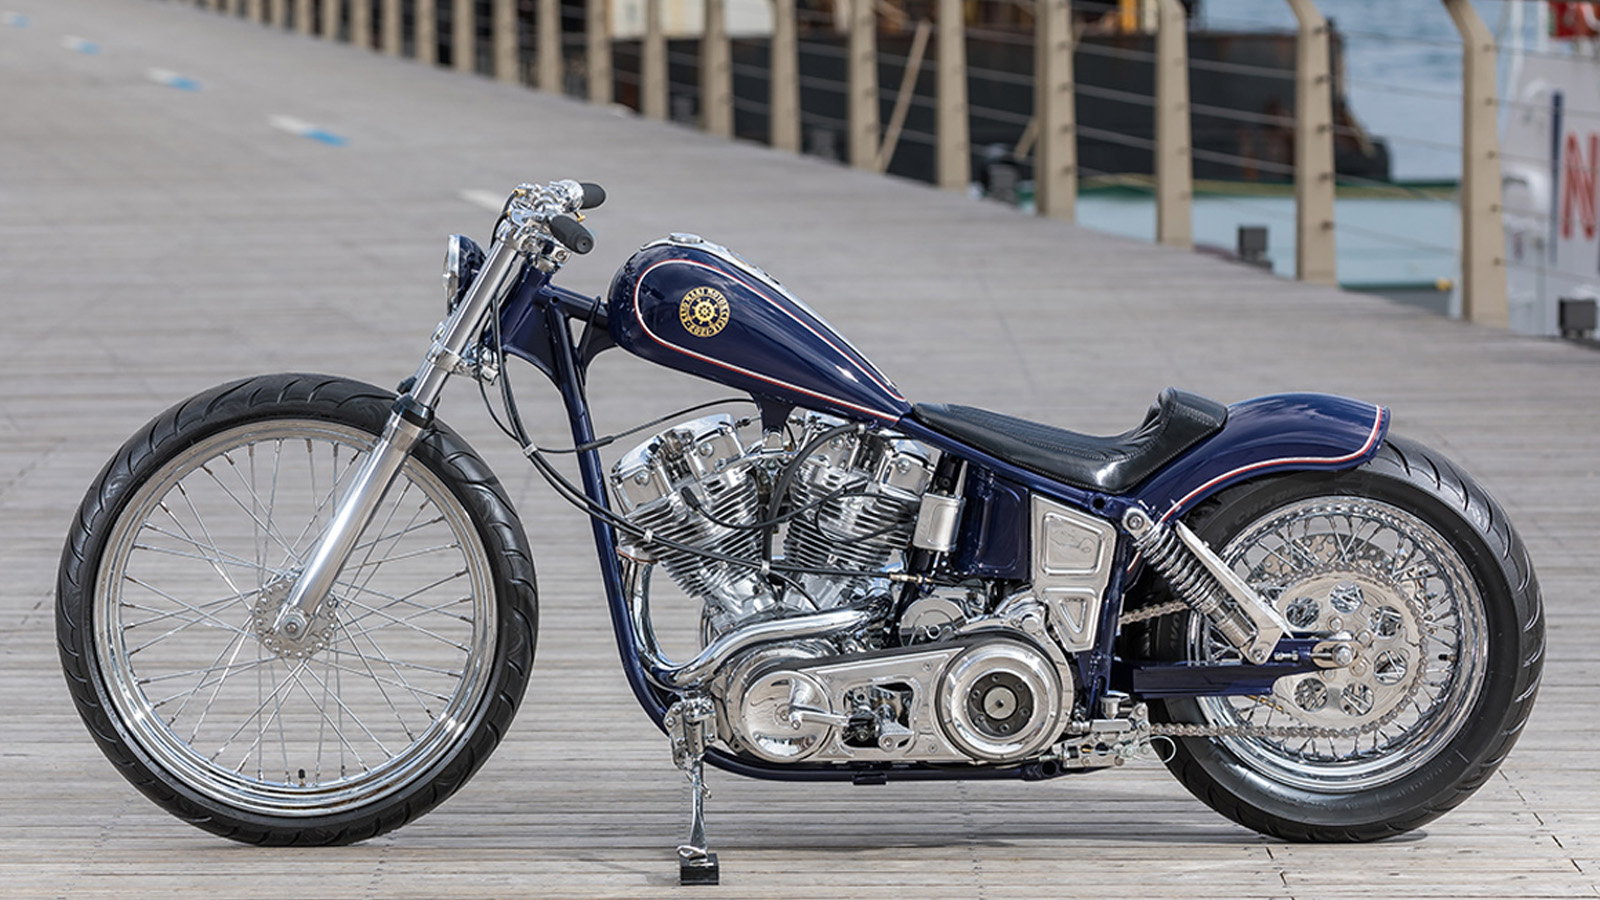 Less is More' Shovelhead is Artfully Crafted | Hdforums